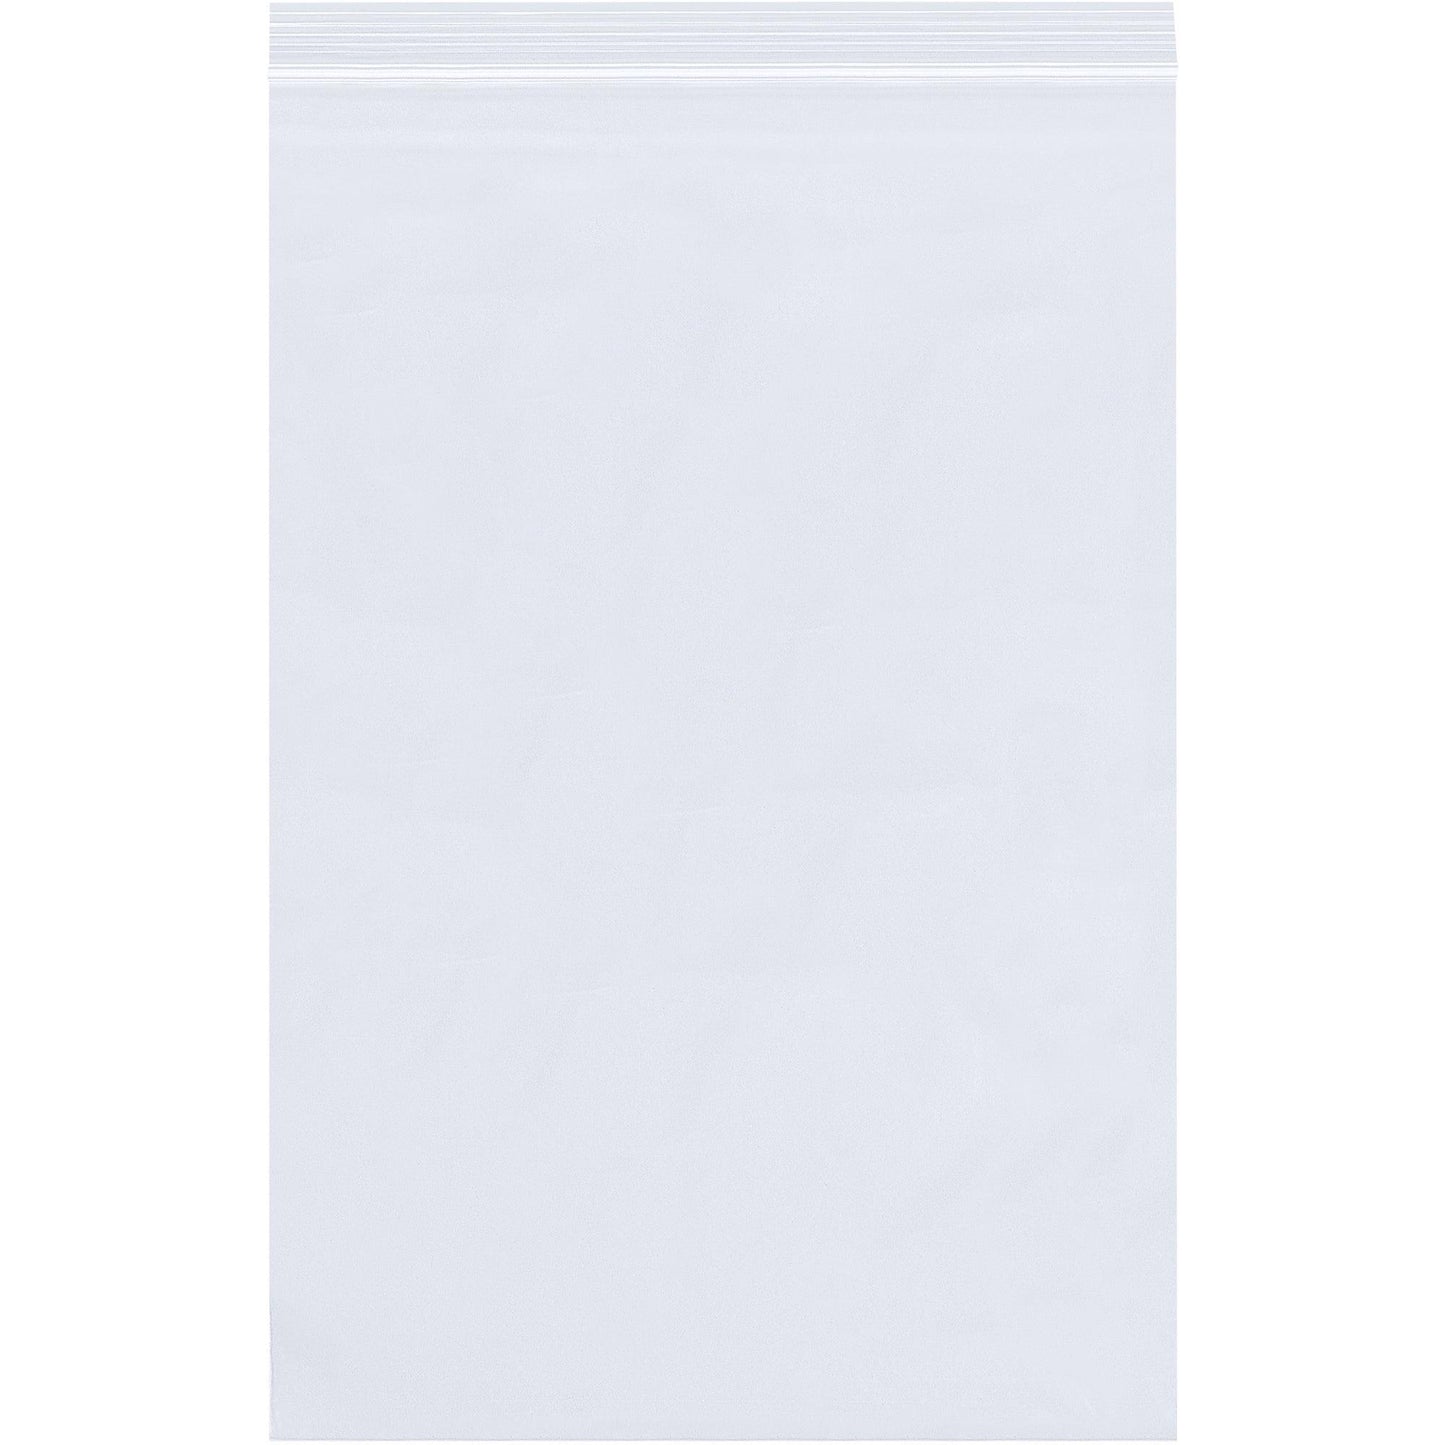 8 x 30" - 4 Mil Reclosable Poly Bags - PB4232